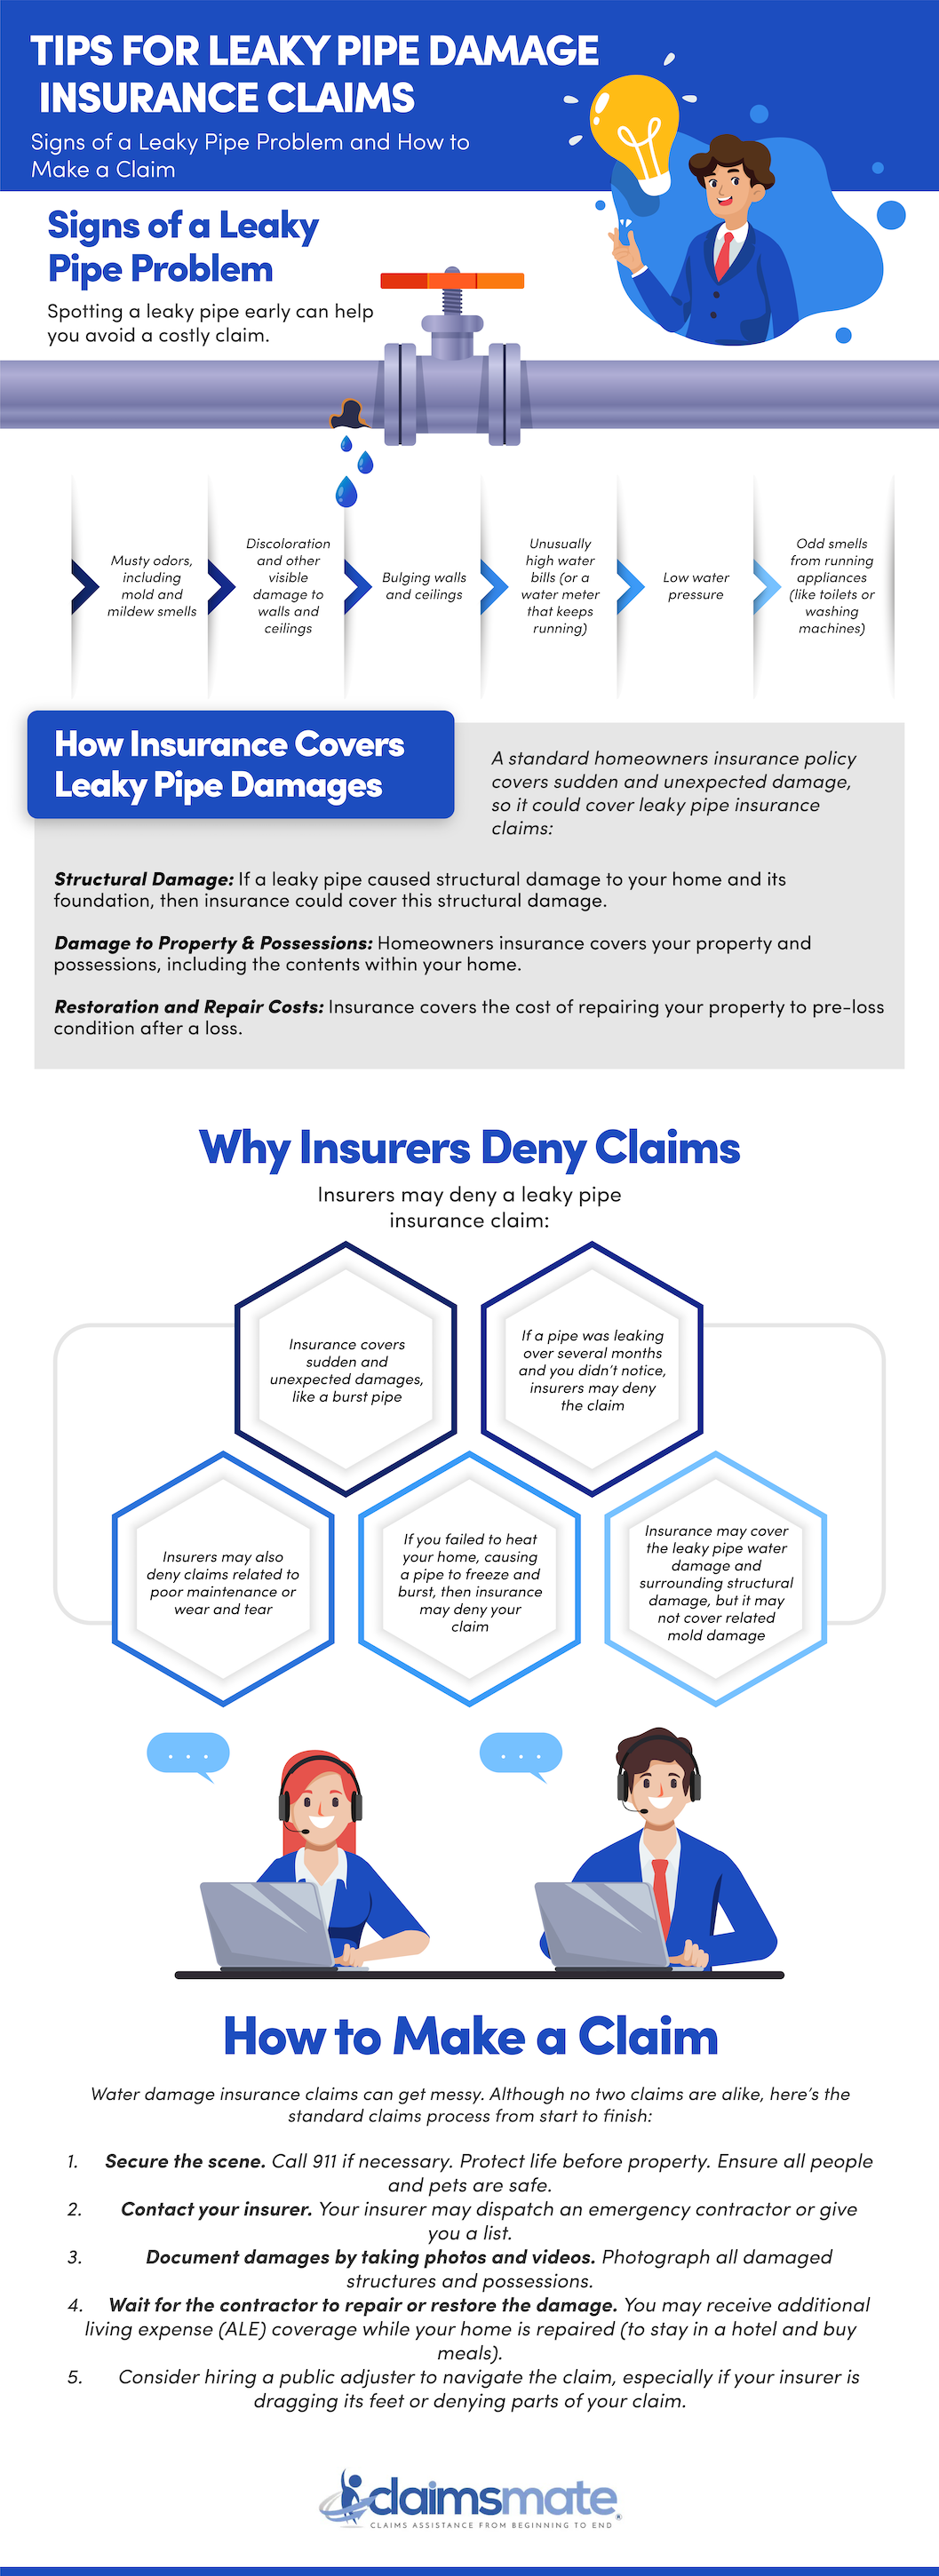 Tips for Leaky Pipe Damge Insurance Claims